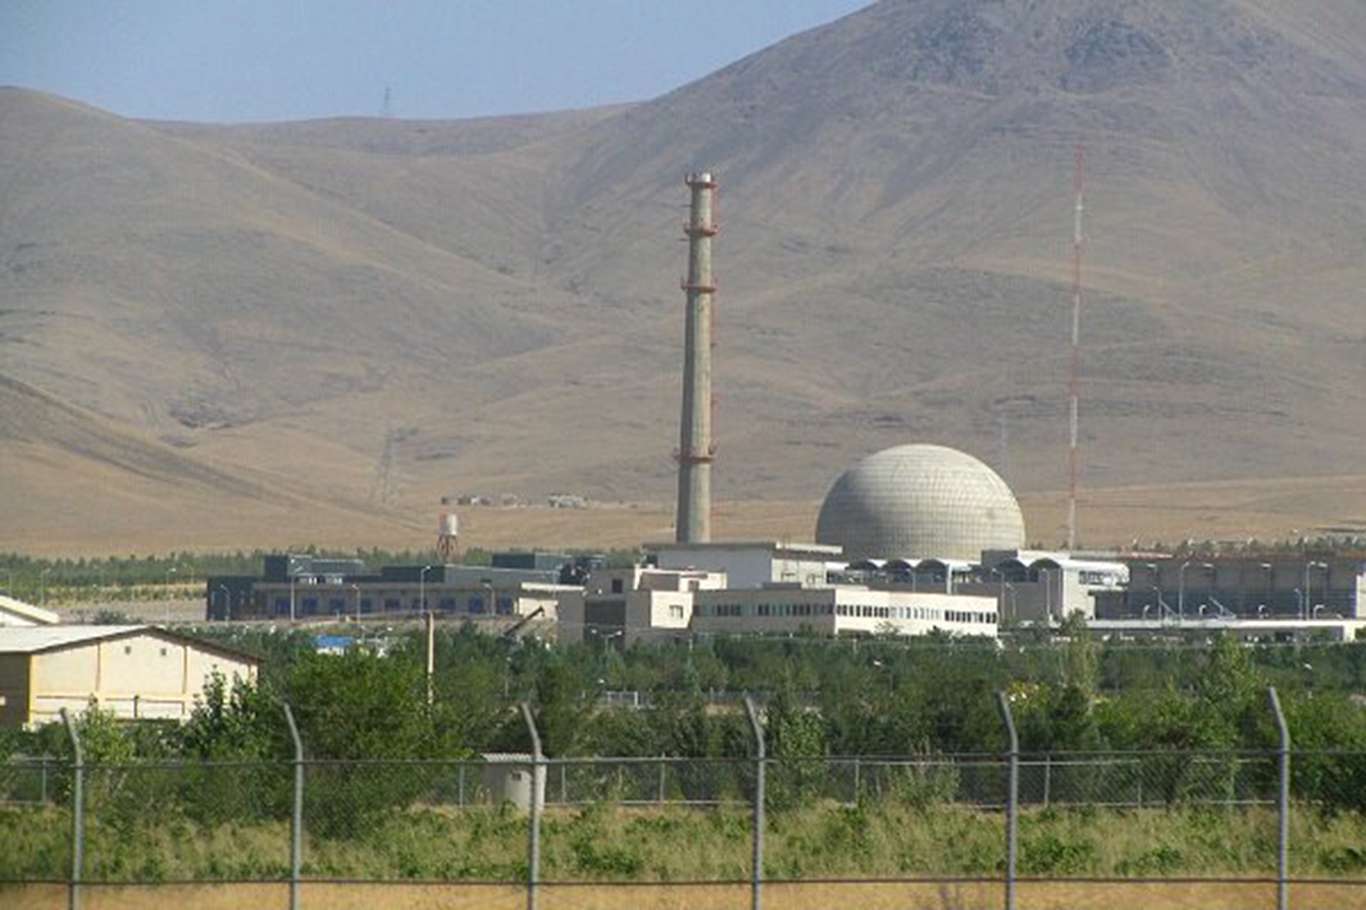 An incident takes place in Iran’s Natanz nuclear facility